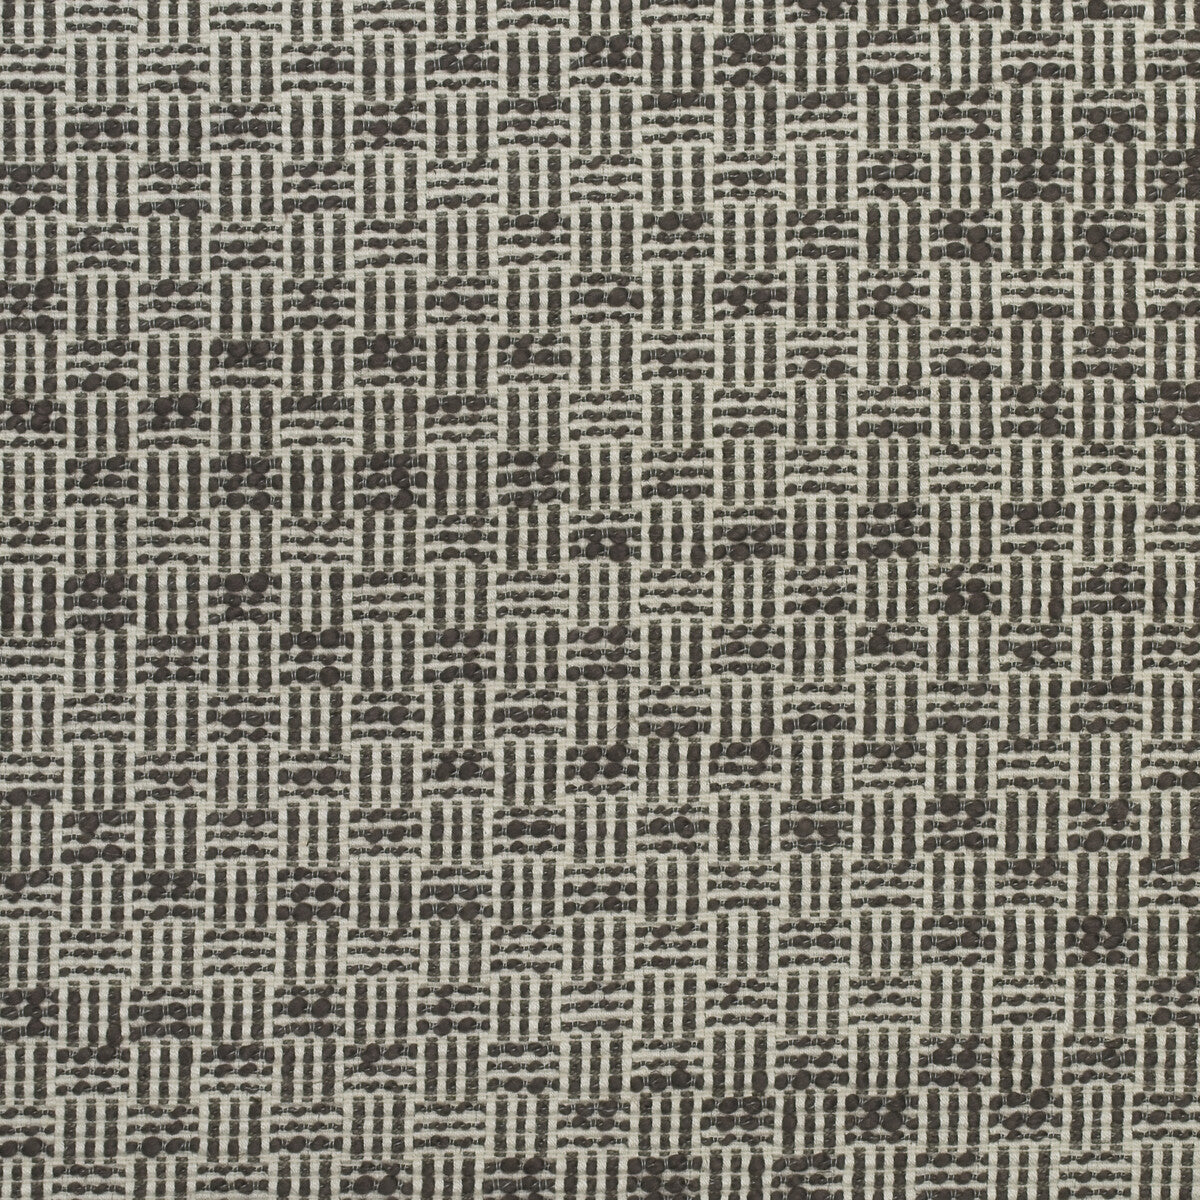 Flint fabric in truffle color - pattern AM100395.621.0 - by Kravet Couture in the Andrew Martin Woodland By Sophie Paterson collection